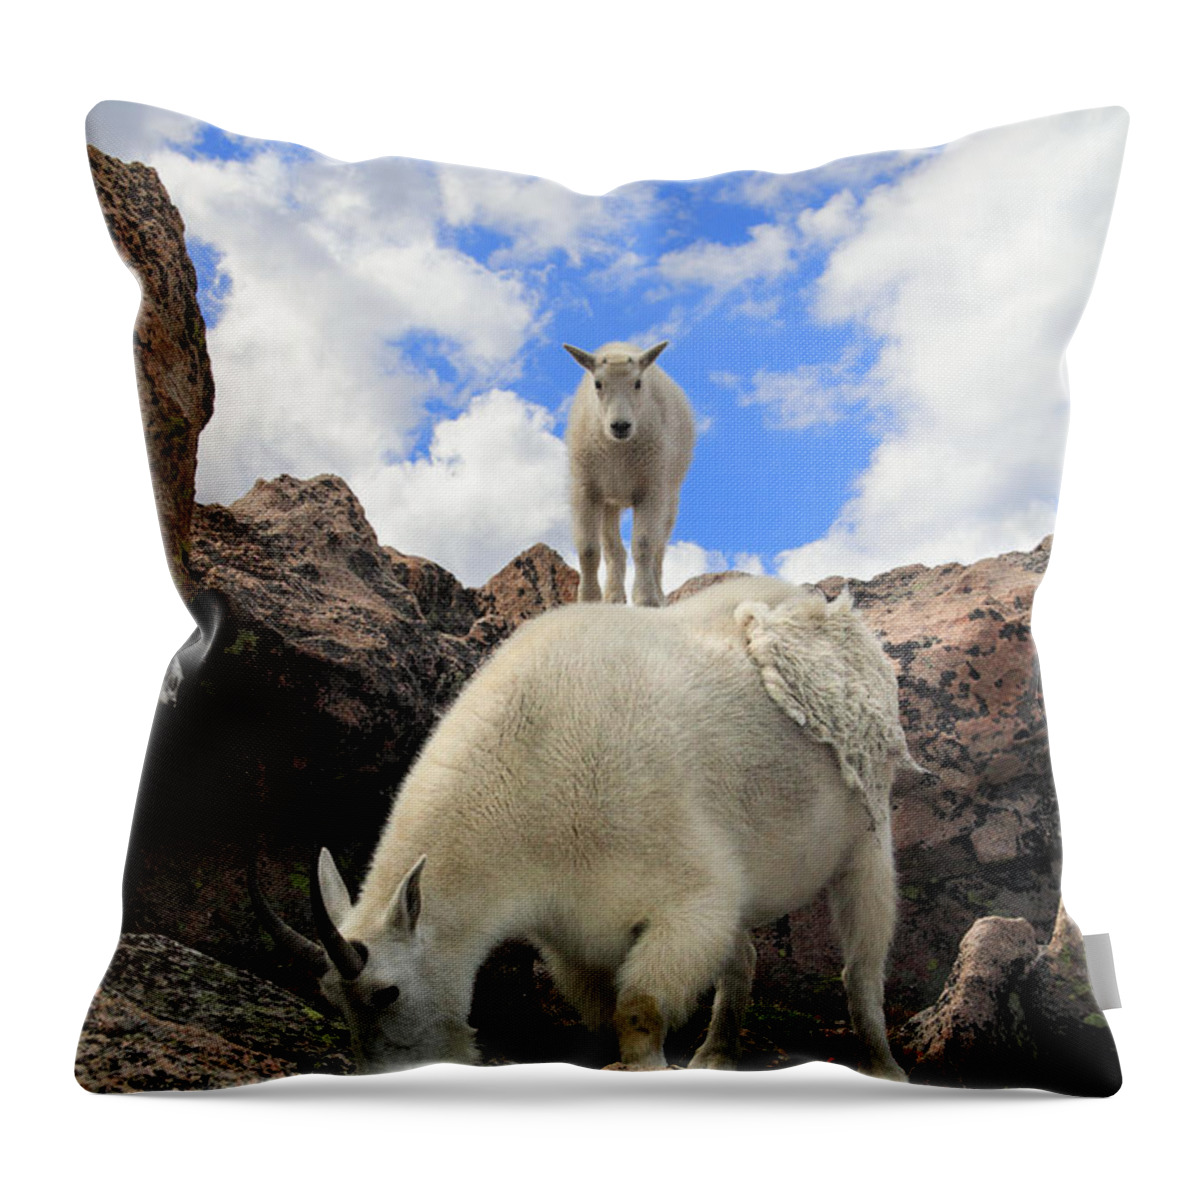 Animals In The Wild Throw Pillow featuring the photograph Mountain Goats Oreamnos Americanus by John Kieffer